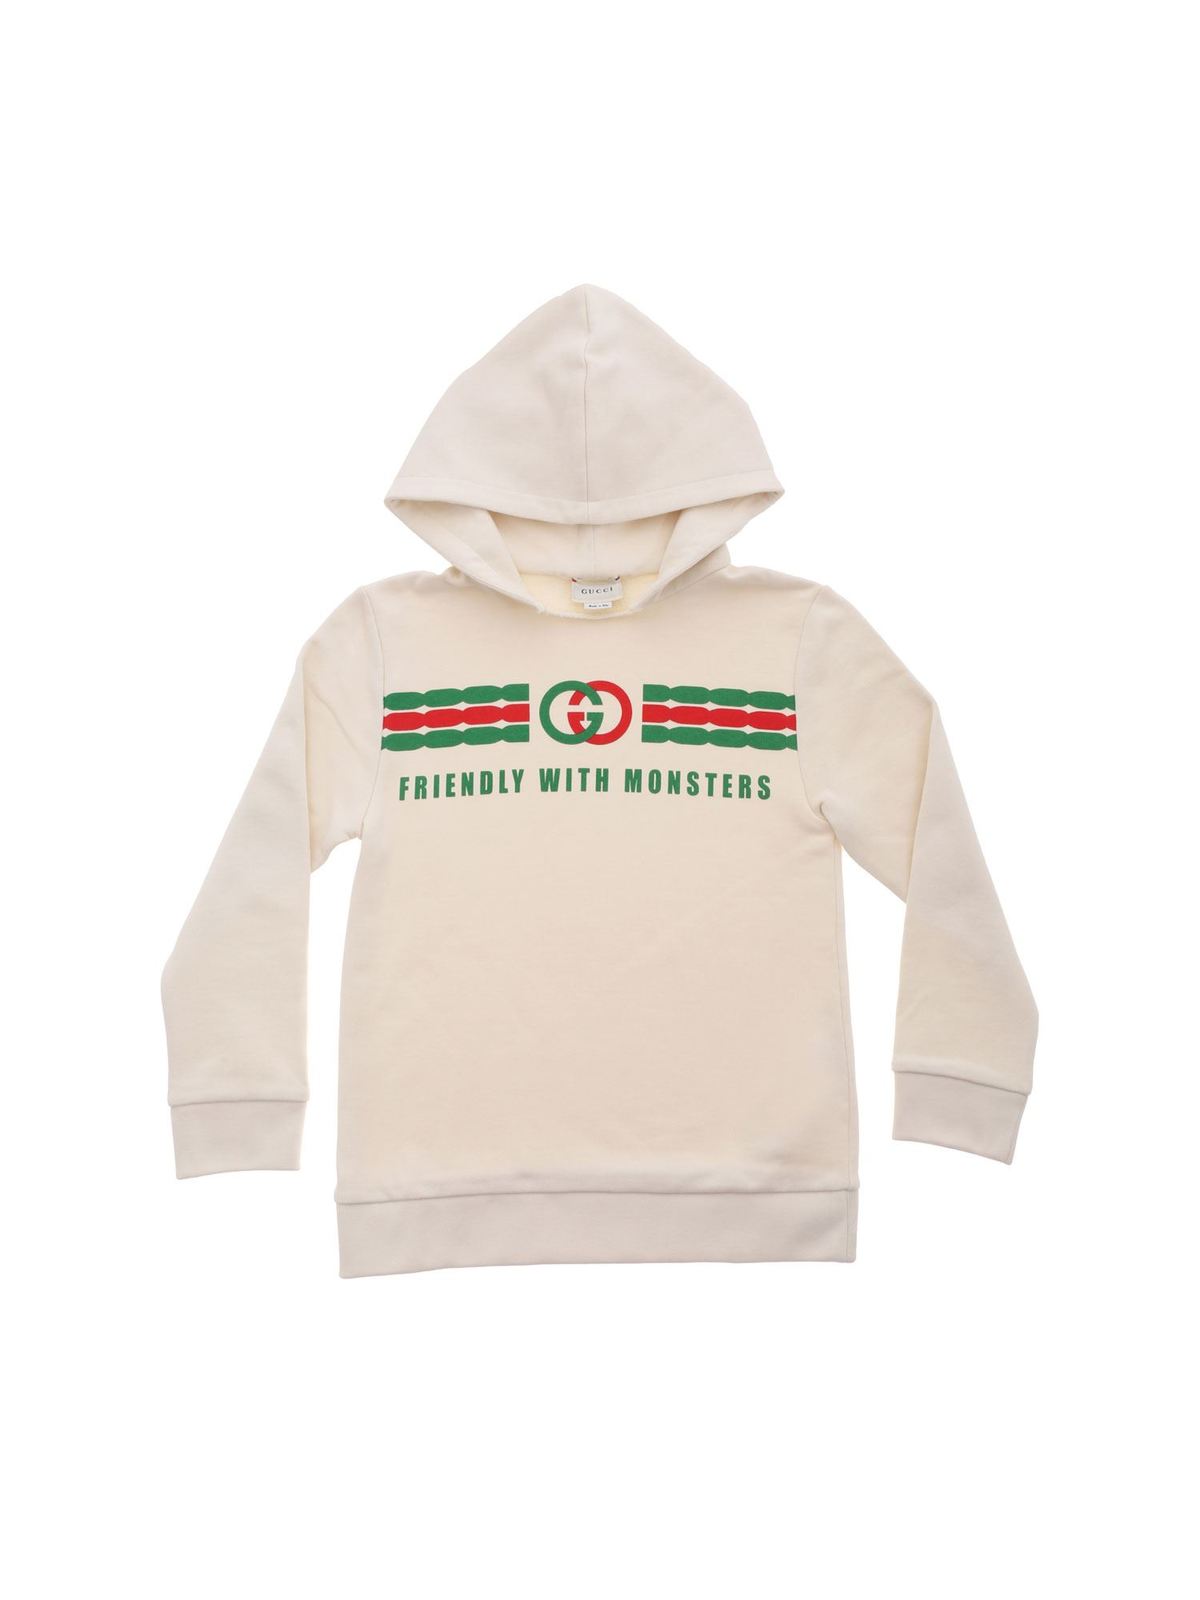 GUCCI LOGO HOODIE IN IVORY COLOR